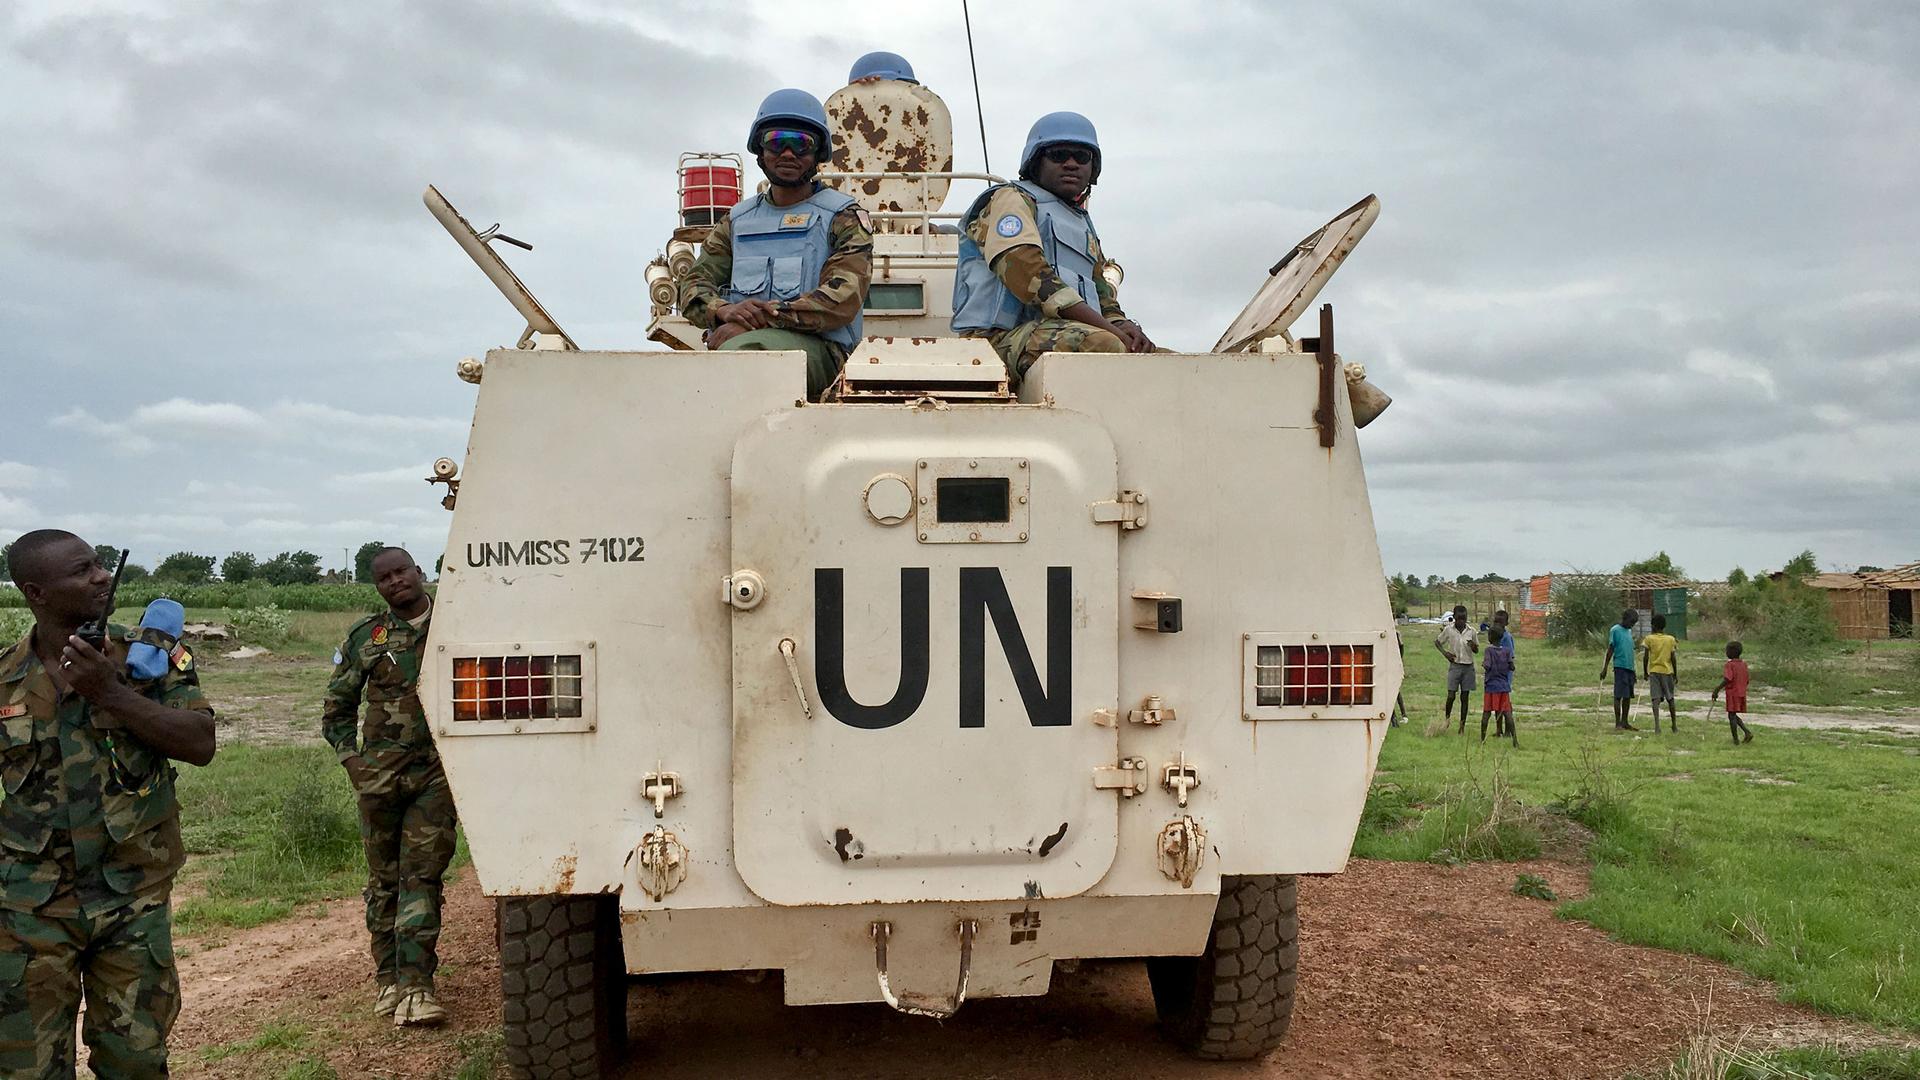 Peacekeepers from the United Nations Mission in the Republic of South Sudan (UNMISS) provide security during a visit of UNCHR High Commissioner Filippo Grandi to South Sudan's largest camp for the internally displaced, in Bentiu, South Sudan, Sunday, June